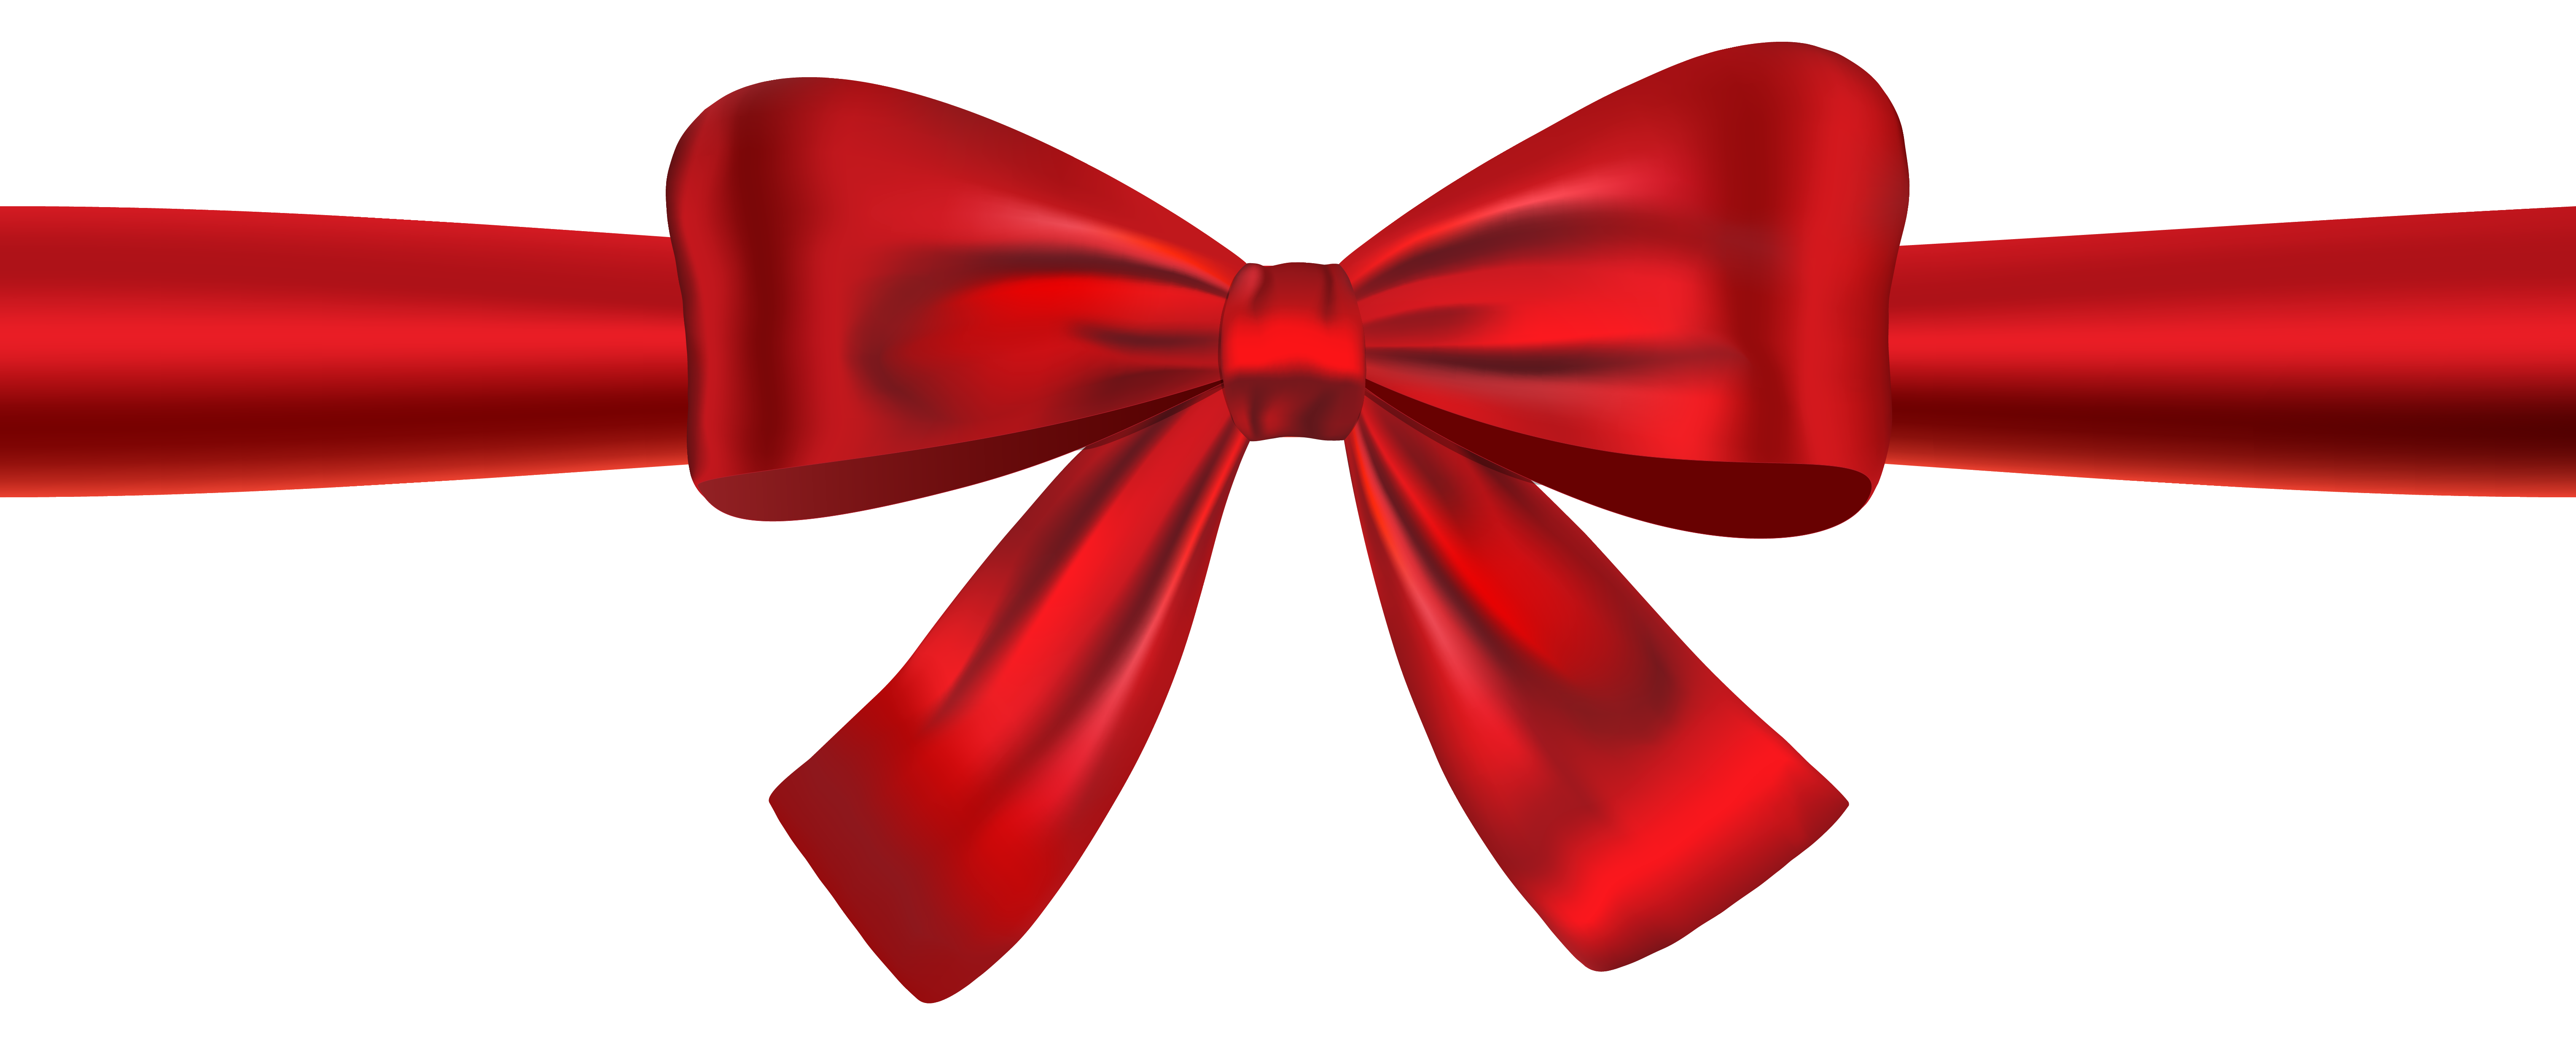 Bow PNG HD